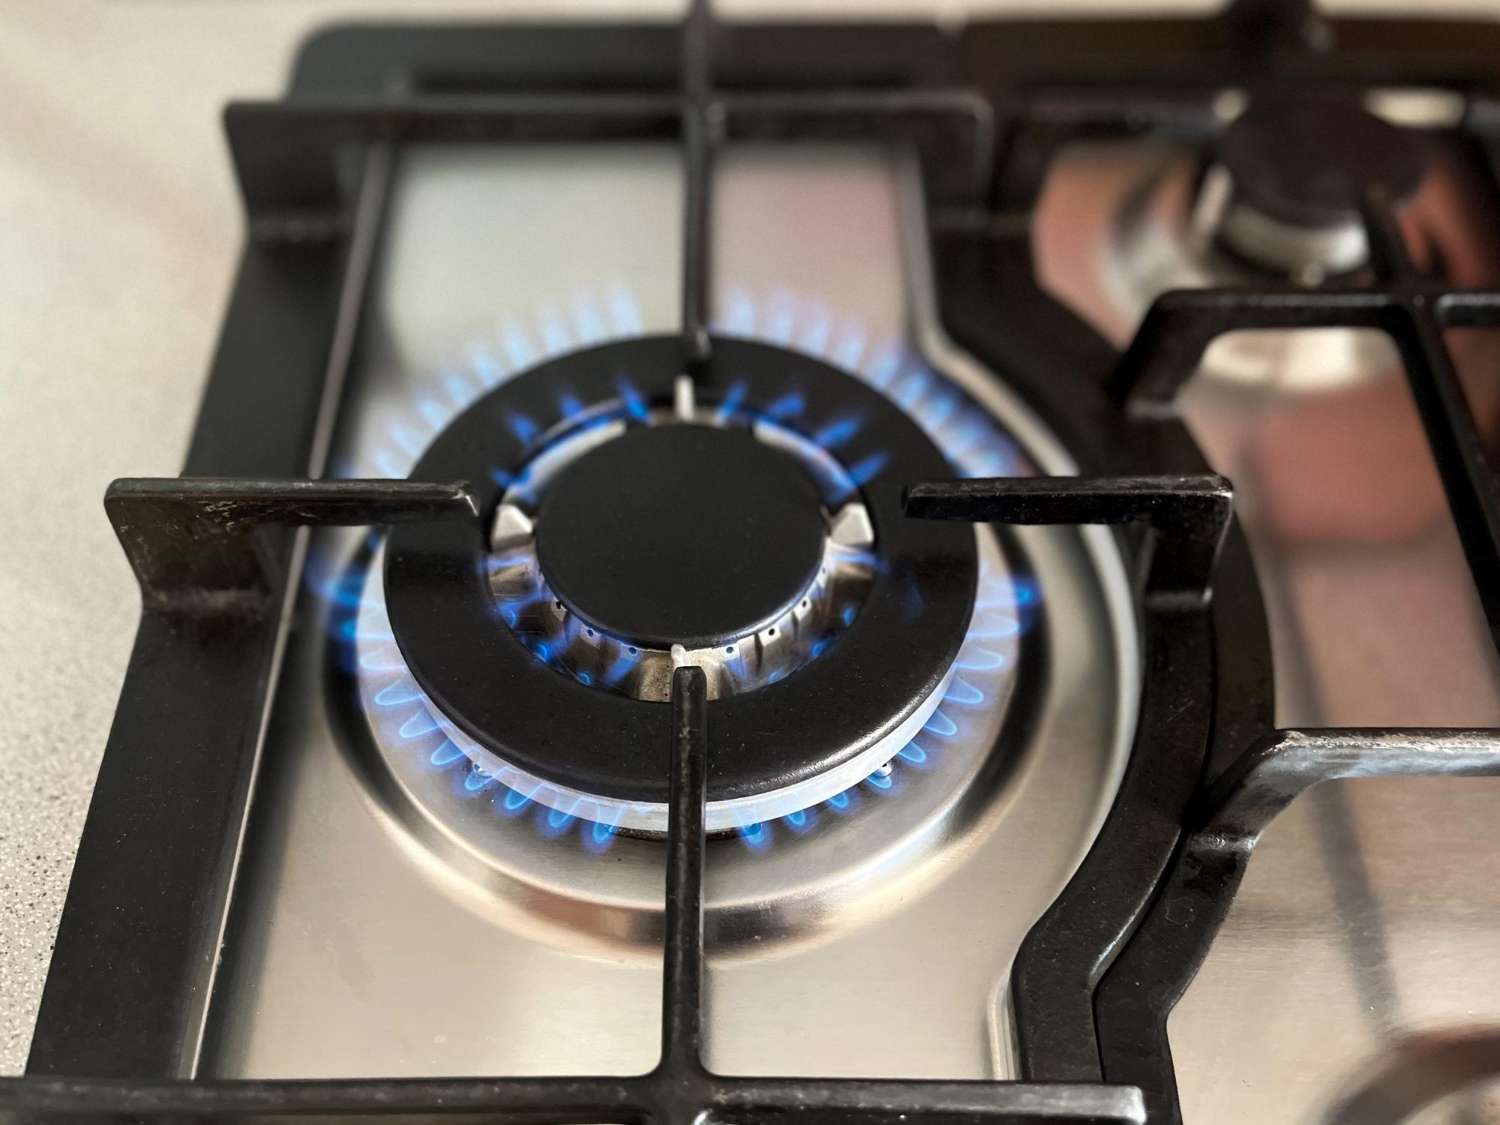 "Close-up of a lit gas stove burner with blue flames, showcasing the burner's metal grates and reflective stainless steel surface, emphasizing the need for gas lines for stoves